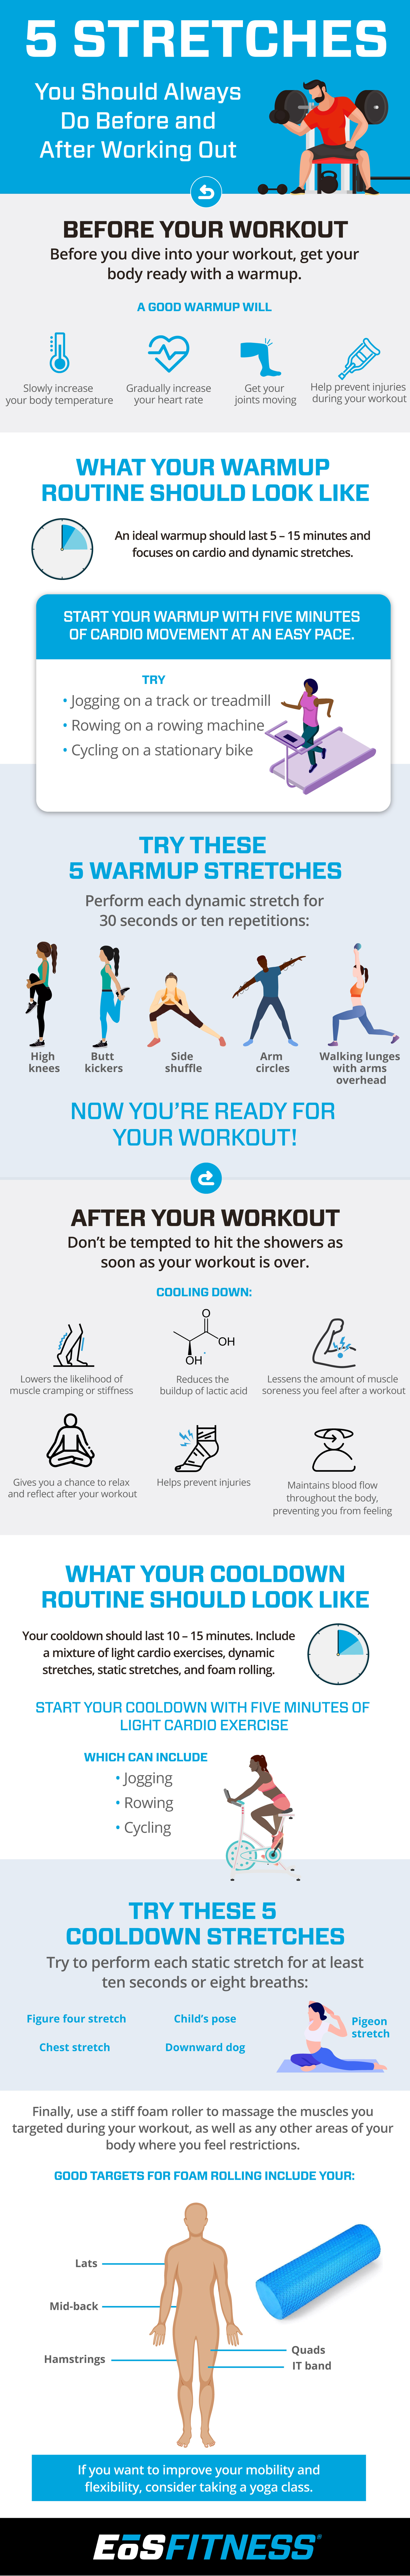 Gym Exercises that Improve Circulation [Infographic]